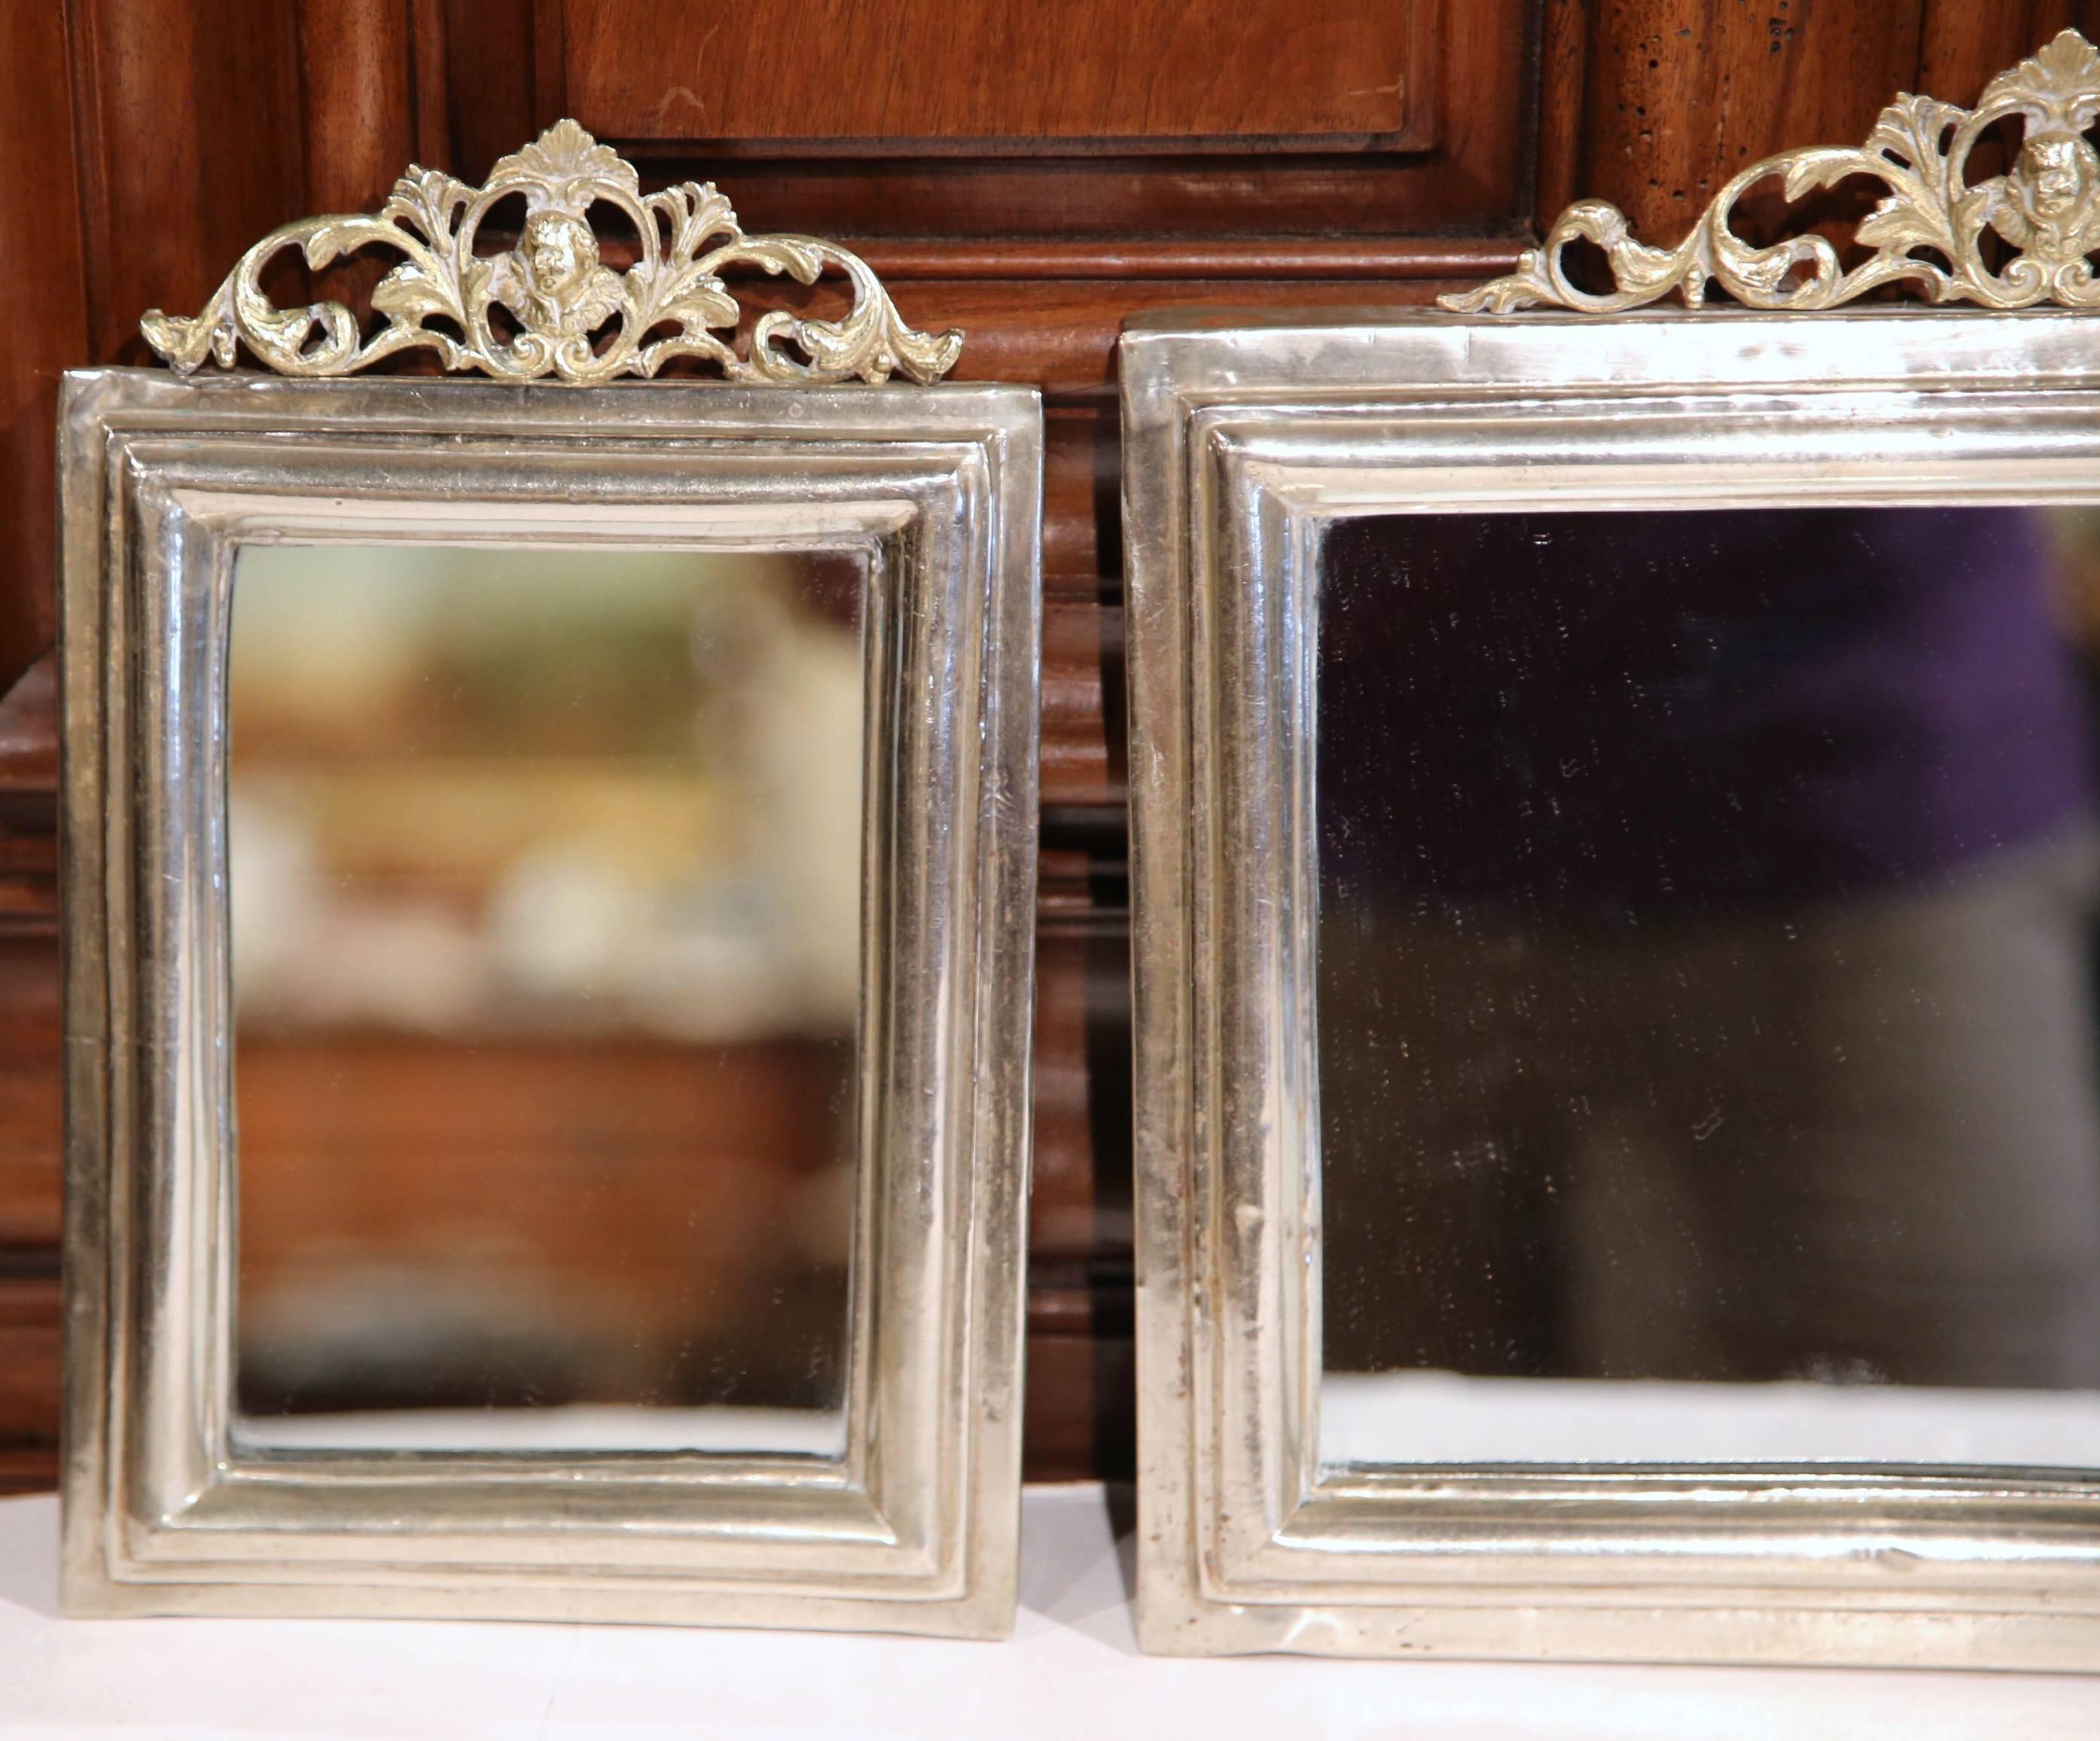 This fine, antique set of three mirrors was created in France, circa 1880. Each of the embellished, handcrafted mirrors features a intricate brass pediment with a cherub's face around a copper, silvered frame. Rectangular in shape, the mirrors are